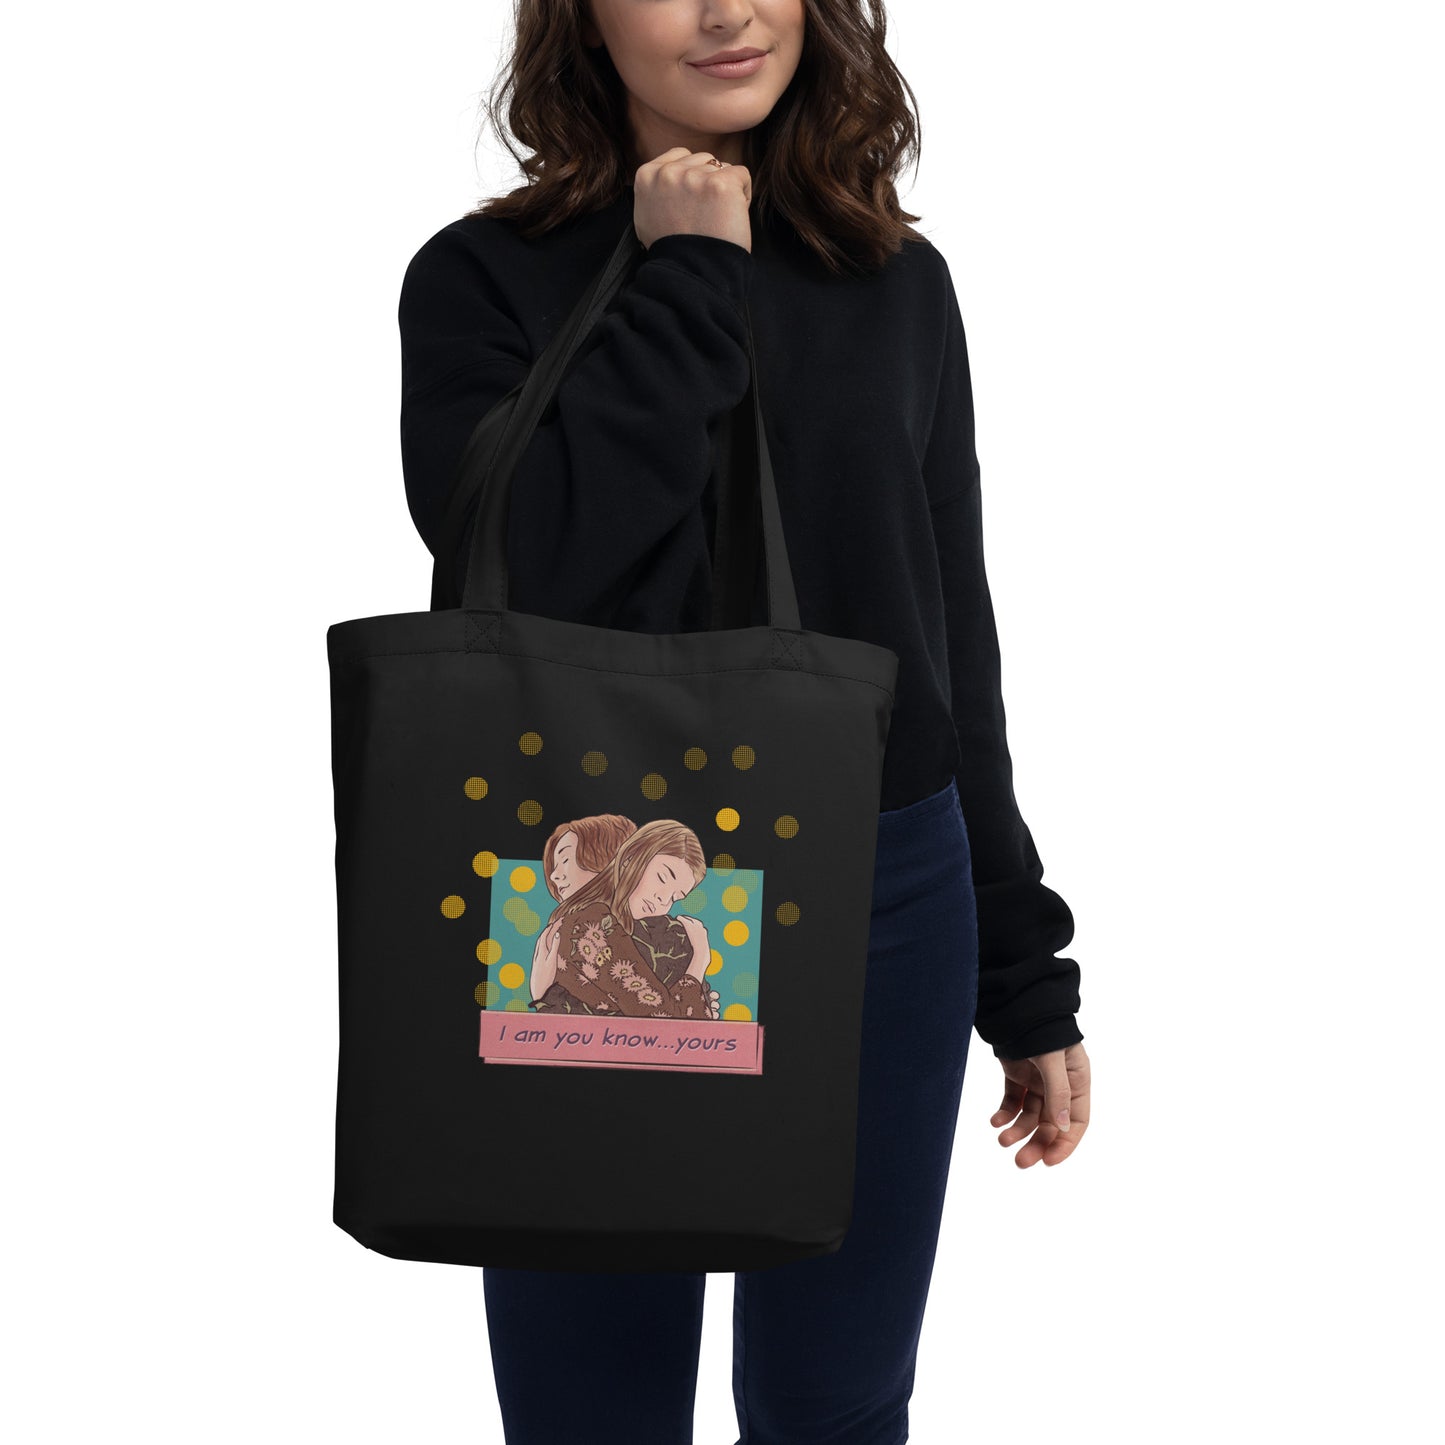 Yours Eco Tote Bag